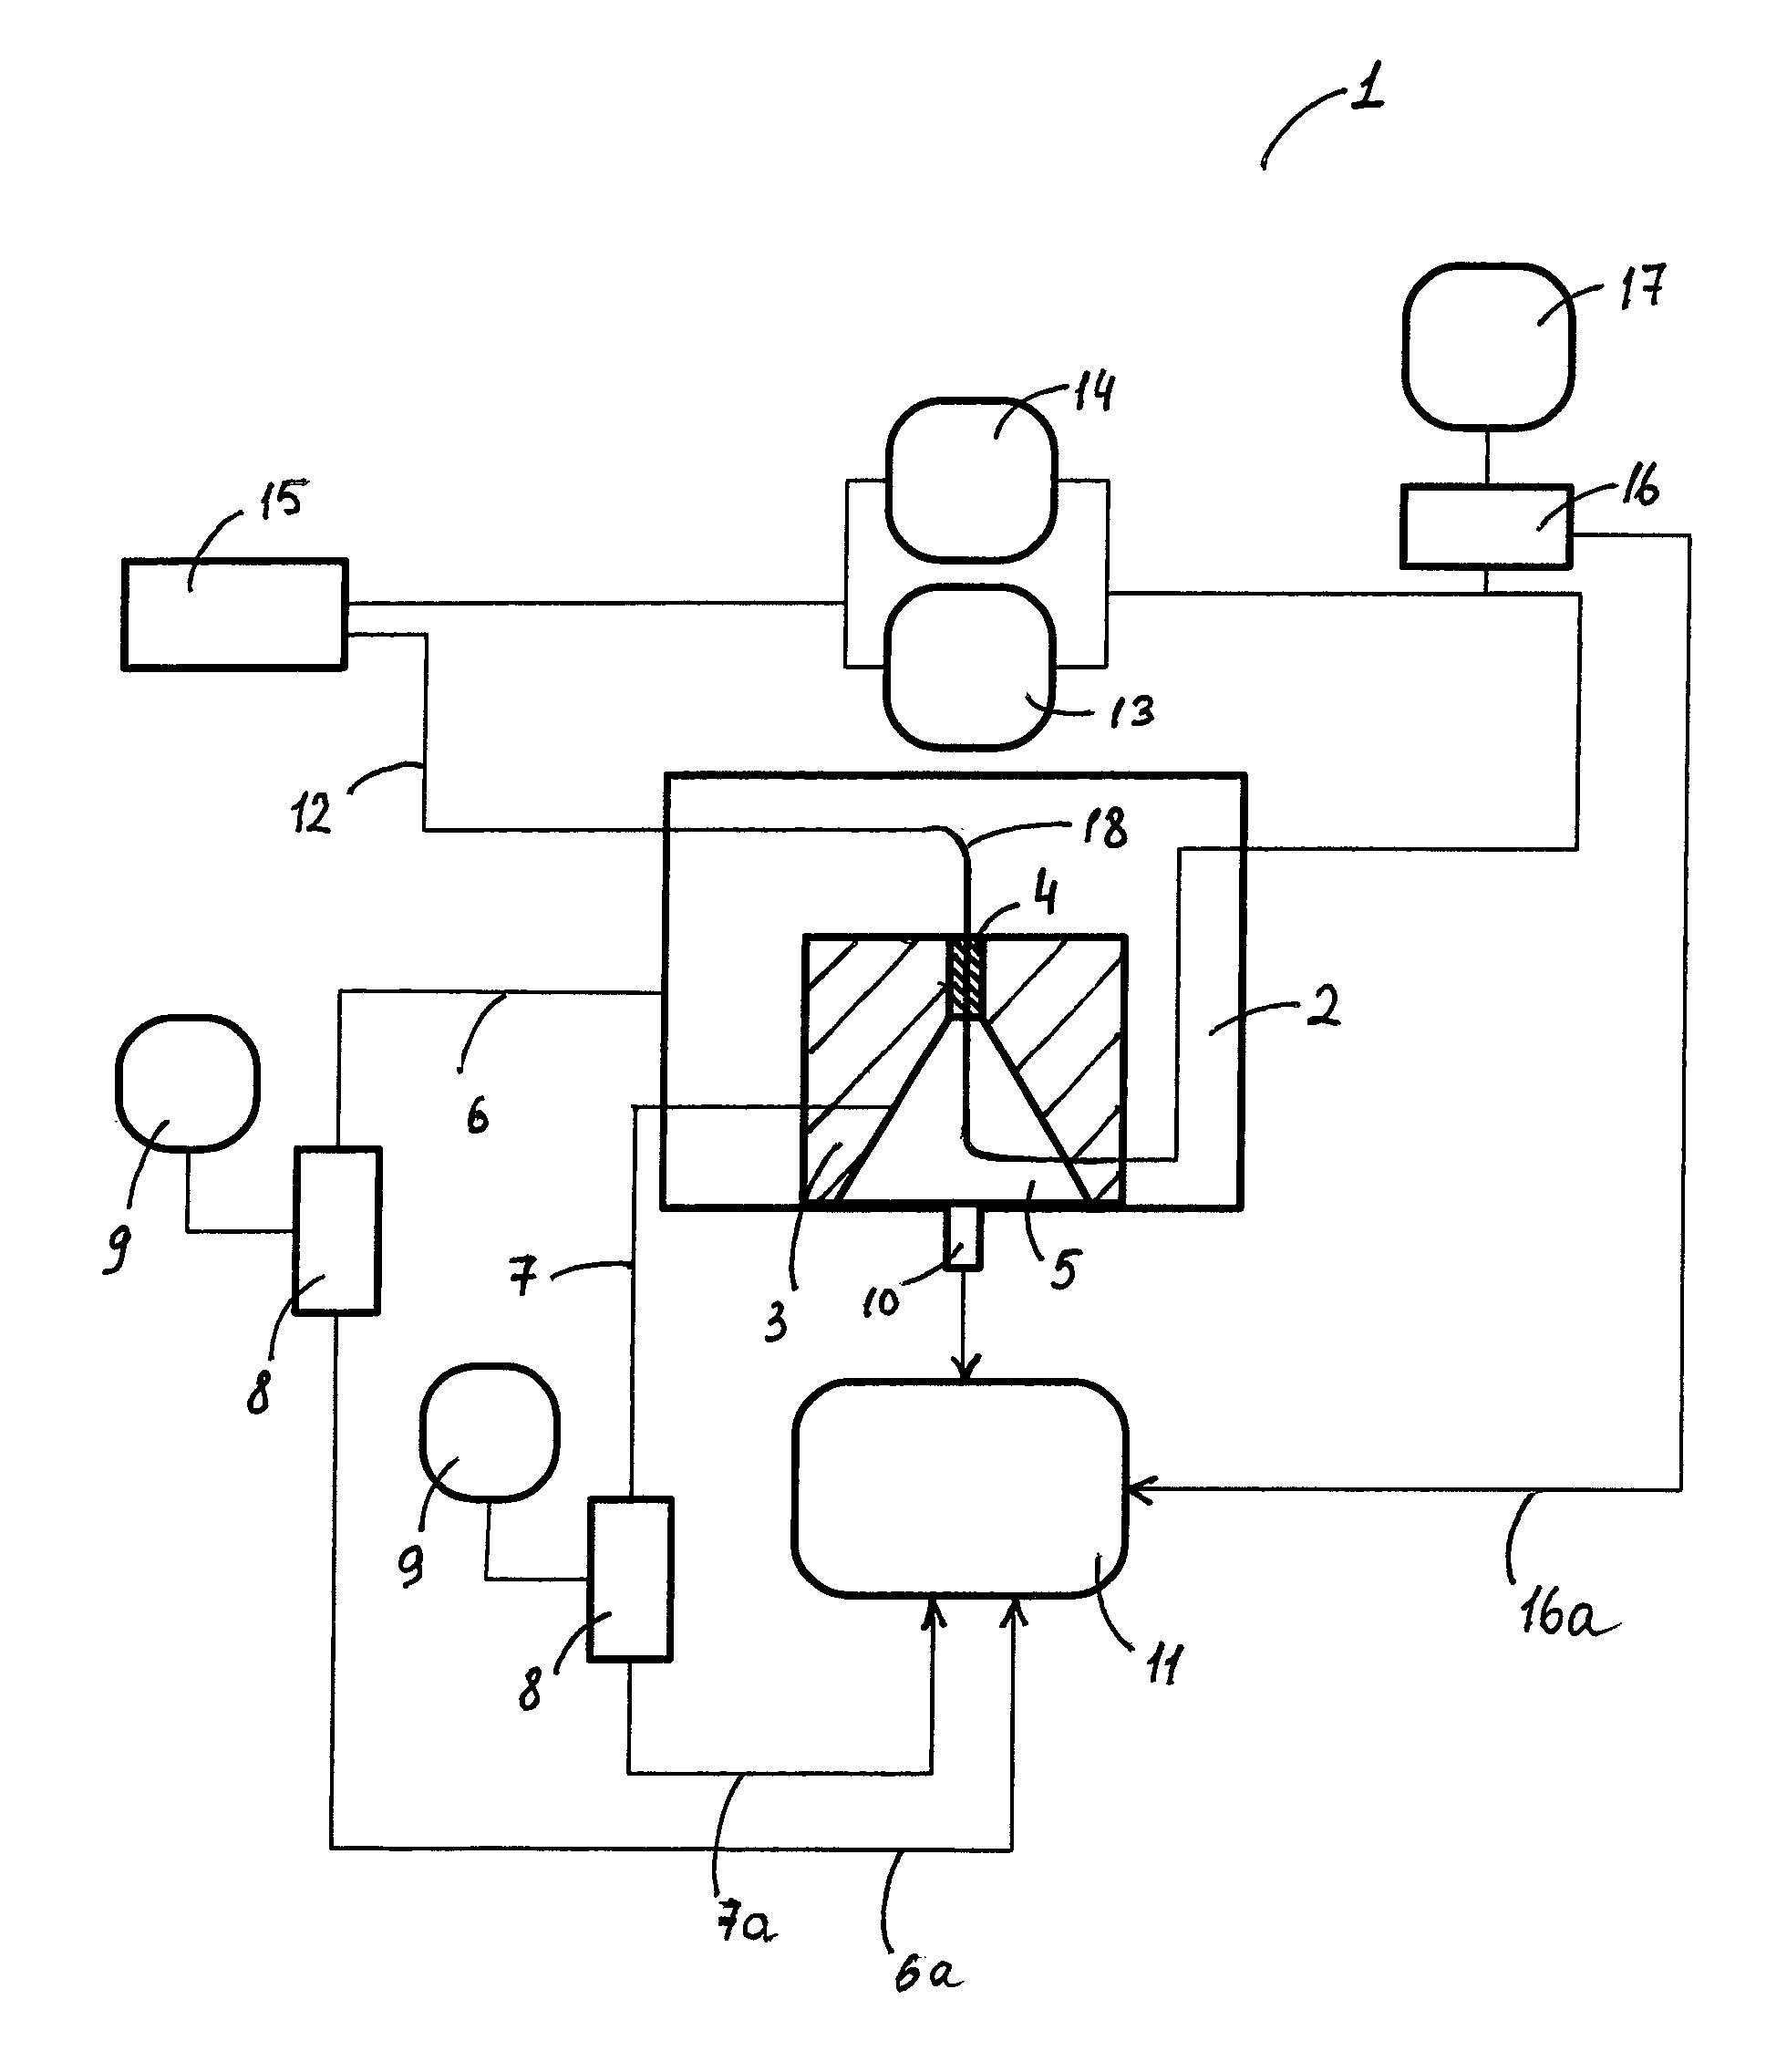 Apparatus and method for simulating arterial blood flow under various pressure conditions